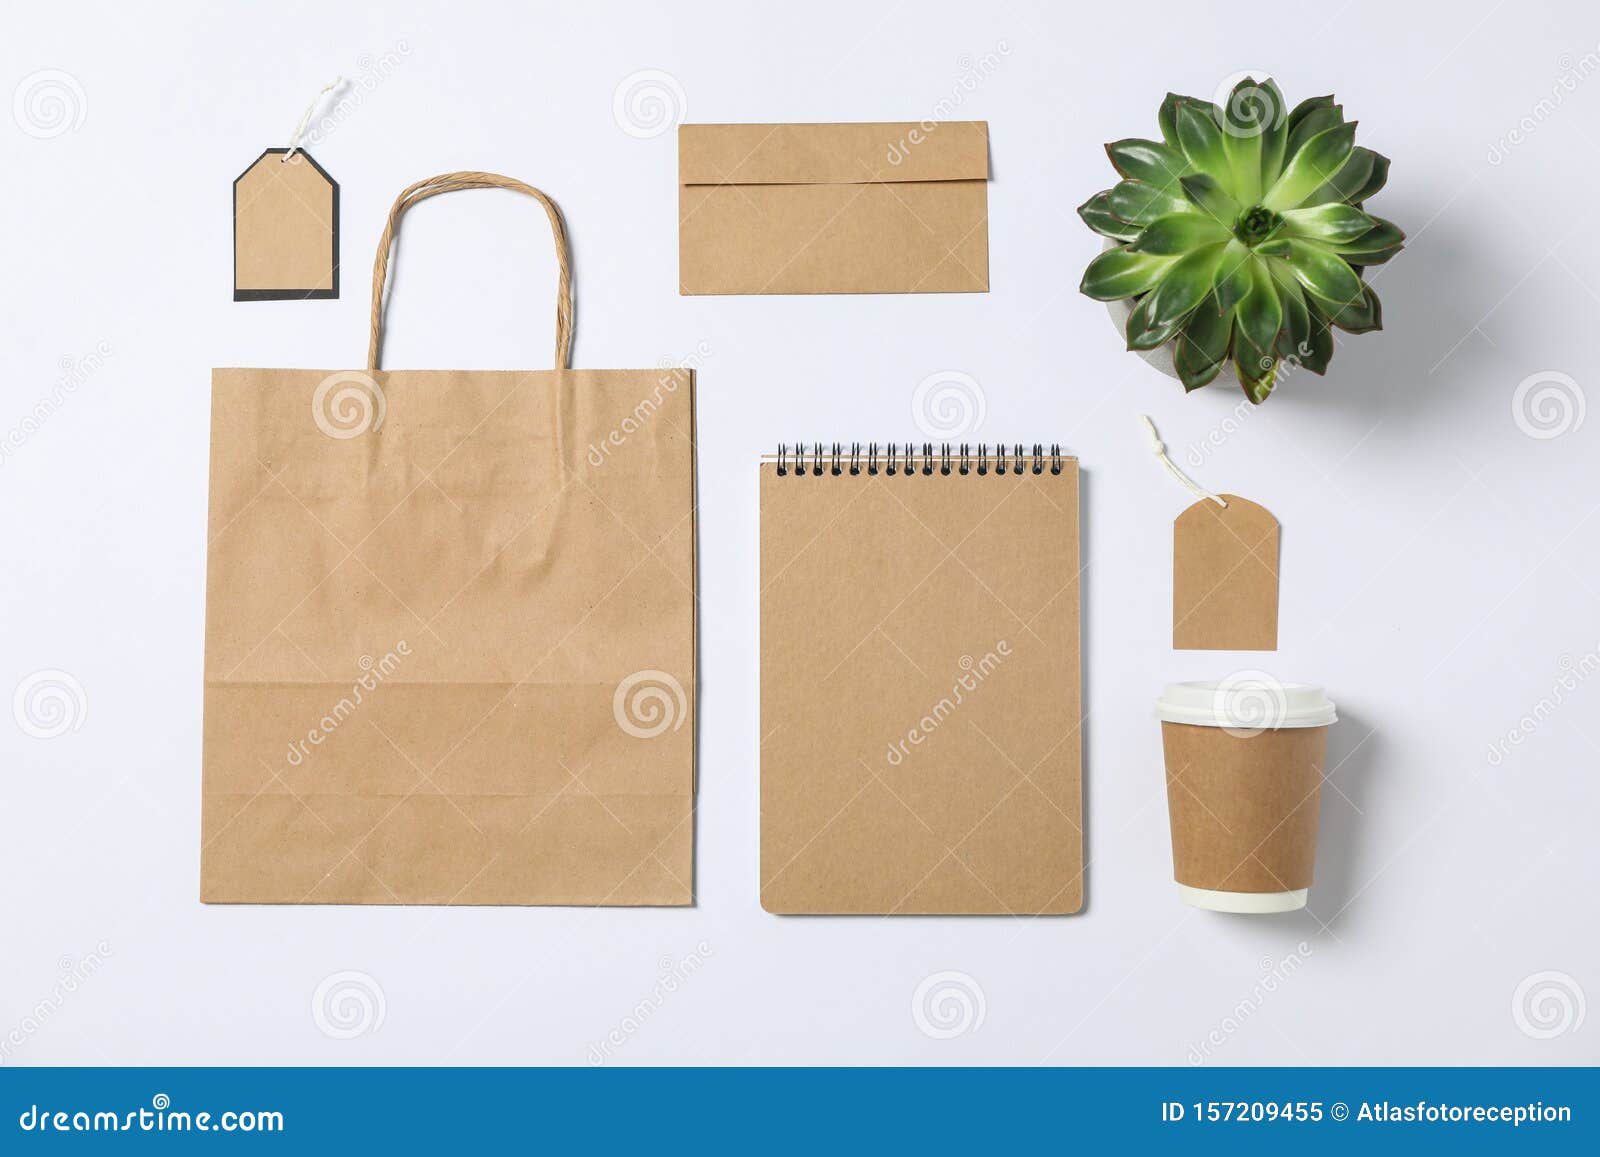 Flat Lay Composition With Blank Stationery, Paper Bag And ...